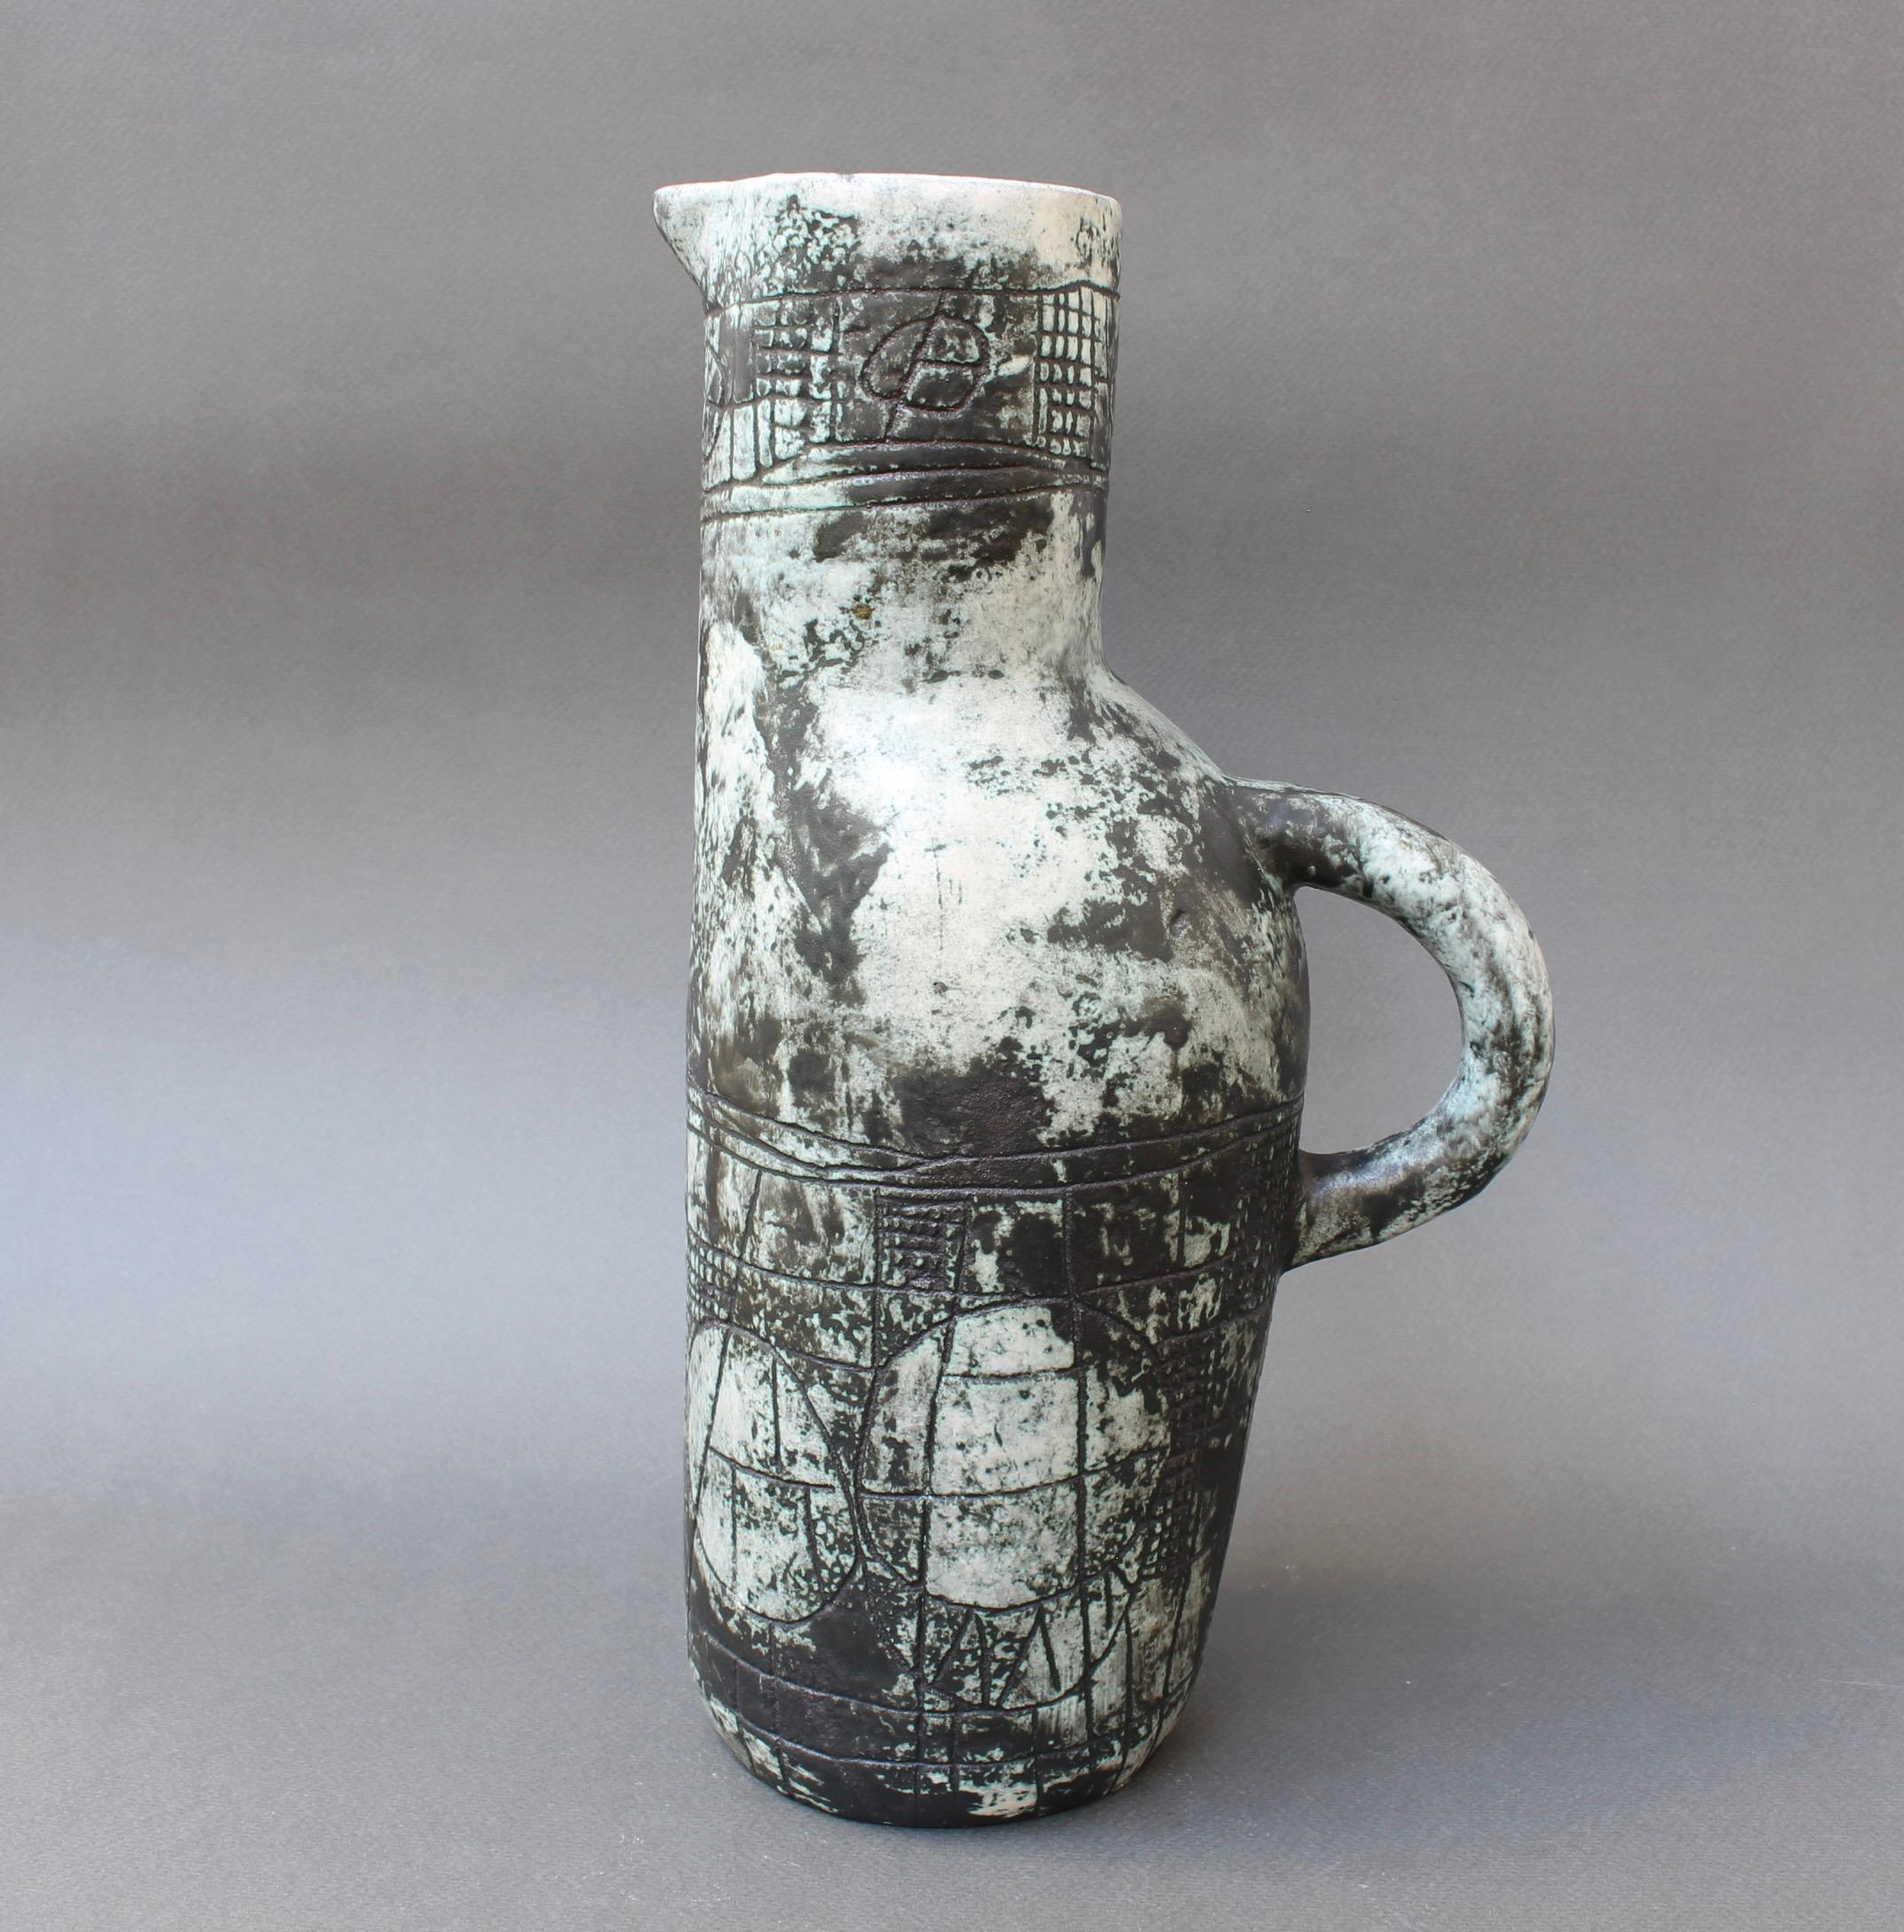 Vintage French ceramic pitcher by Jacques Blin (circa 1960s). Unique in its style and decoration, its form is zoomorphic with incised decor of geometric shapes. Of course Jacques Blin's trademark misty glaze and light green patina make this piece a